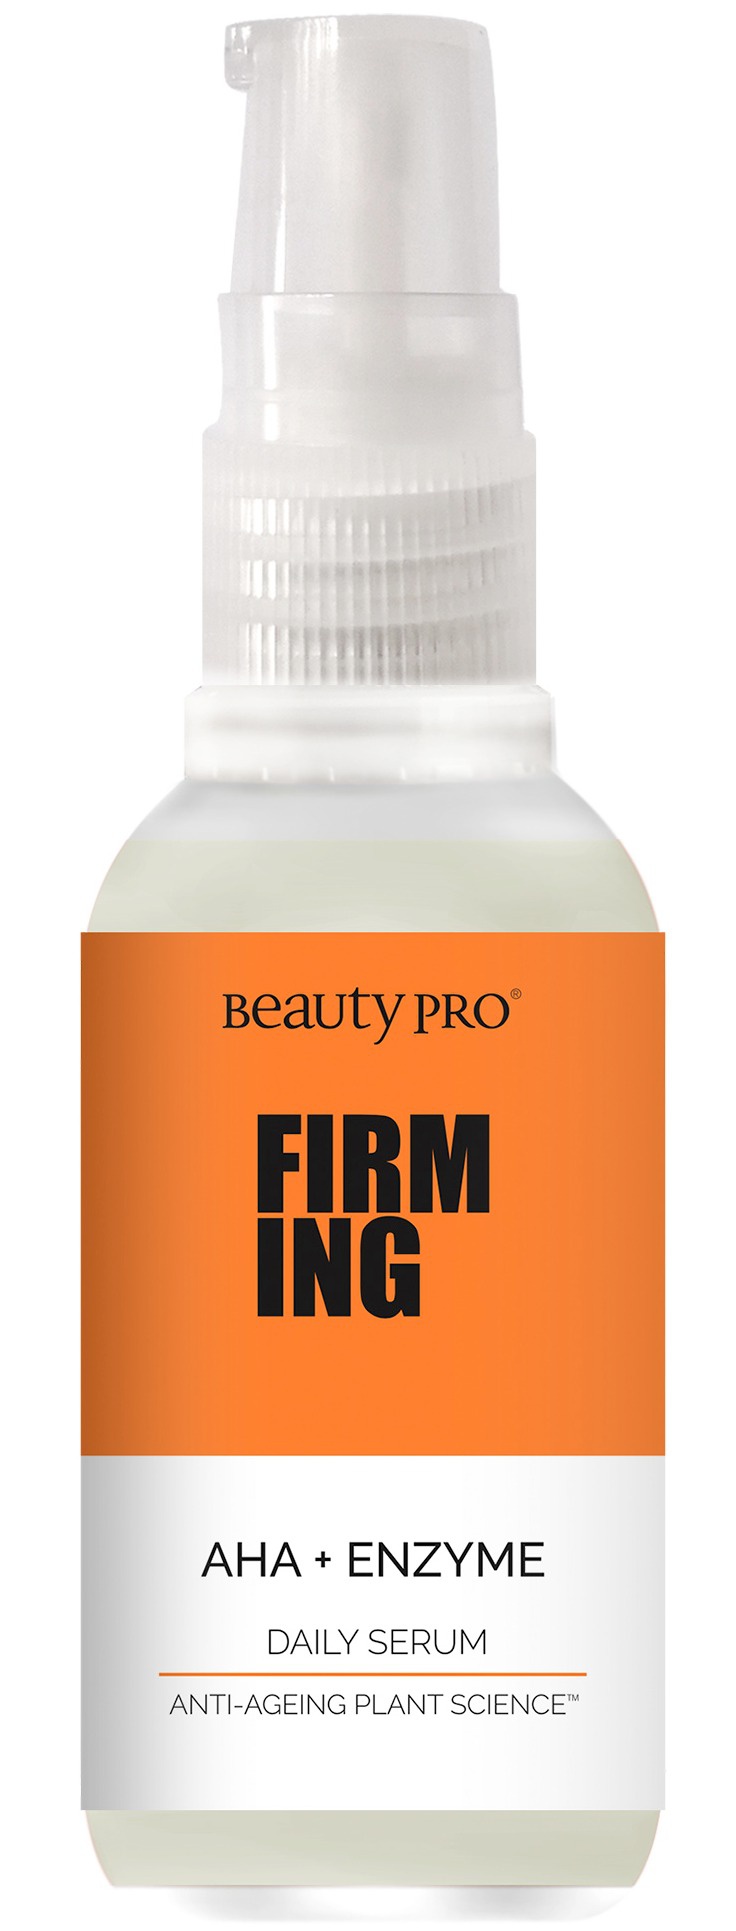 BeautyPro Firming AHA+Enzymes Daily Serum